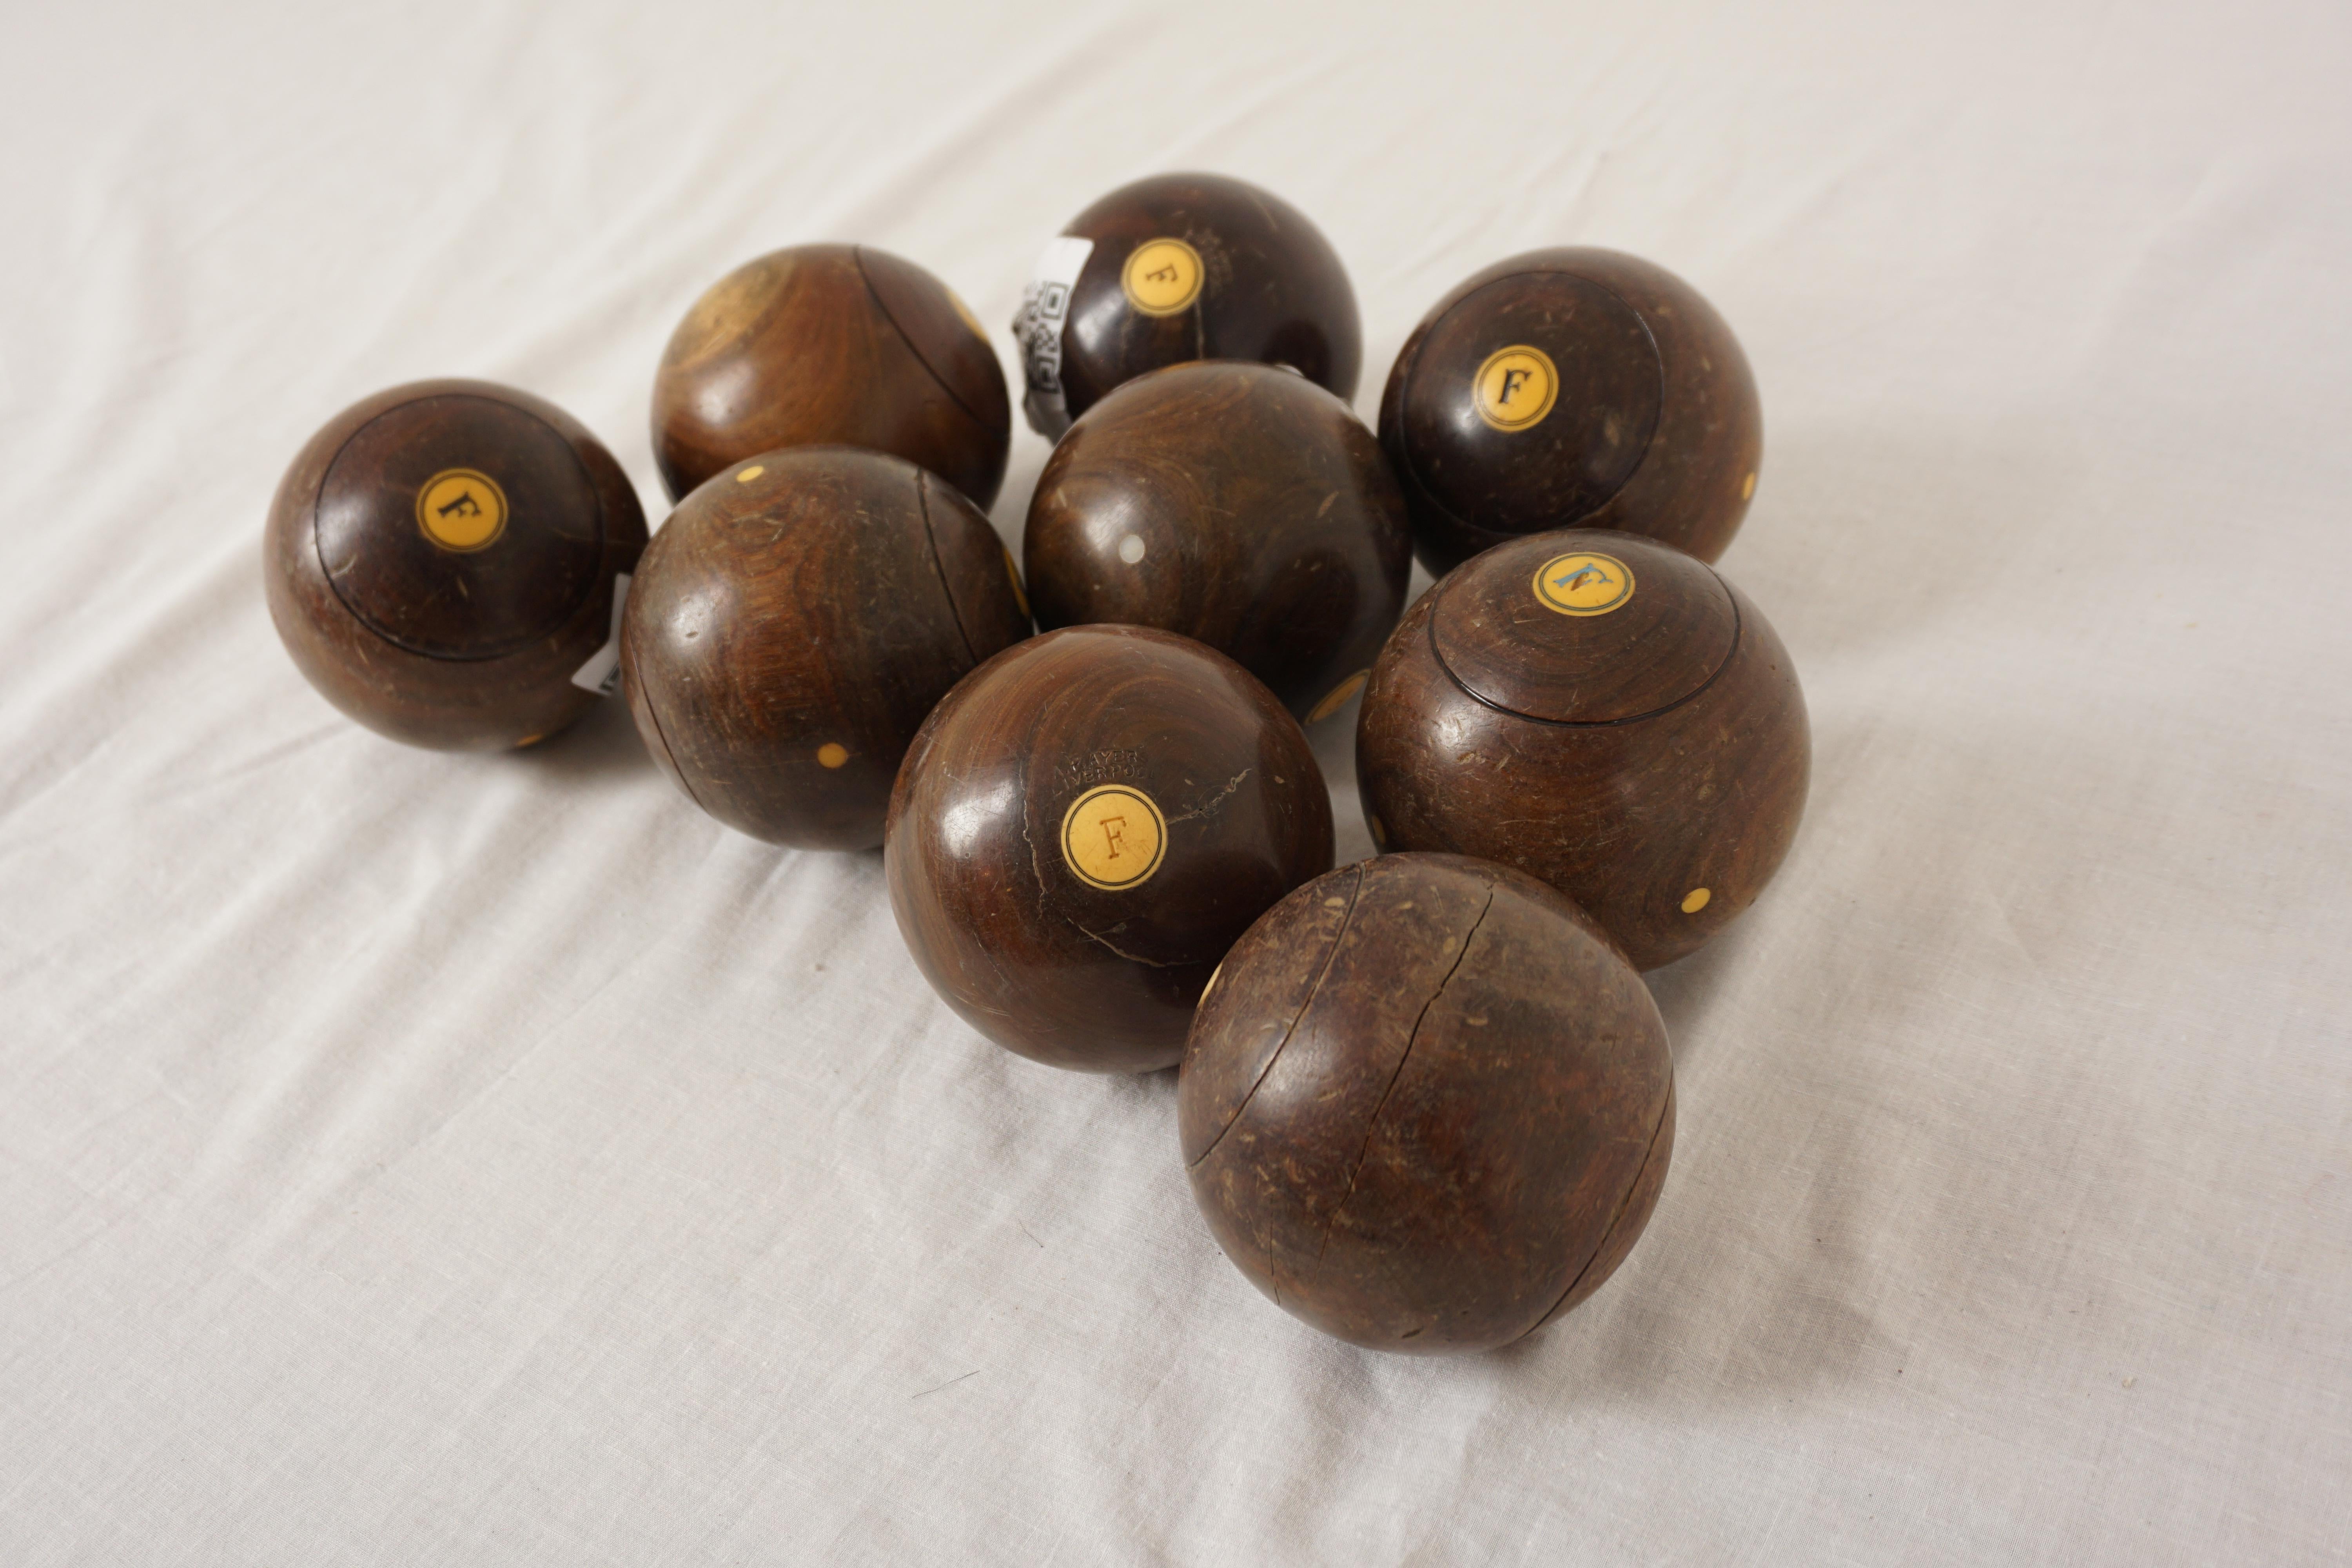 Antique Lignum Vital Balls, Collection of 11 Victorian Indoor Carpet Balls, Antique Toys, Scotland 1870, H1144

+ Scotland 1870
+ Solid lignum vitae
+ Original finish
+ All in wonderful condition
+ With the letter F on both sides of all